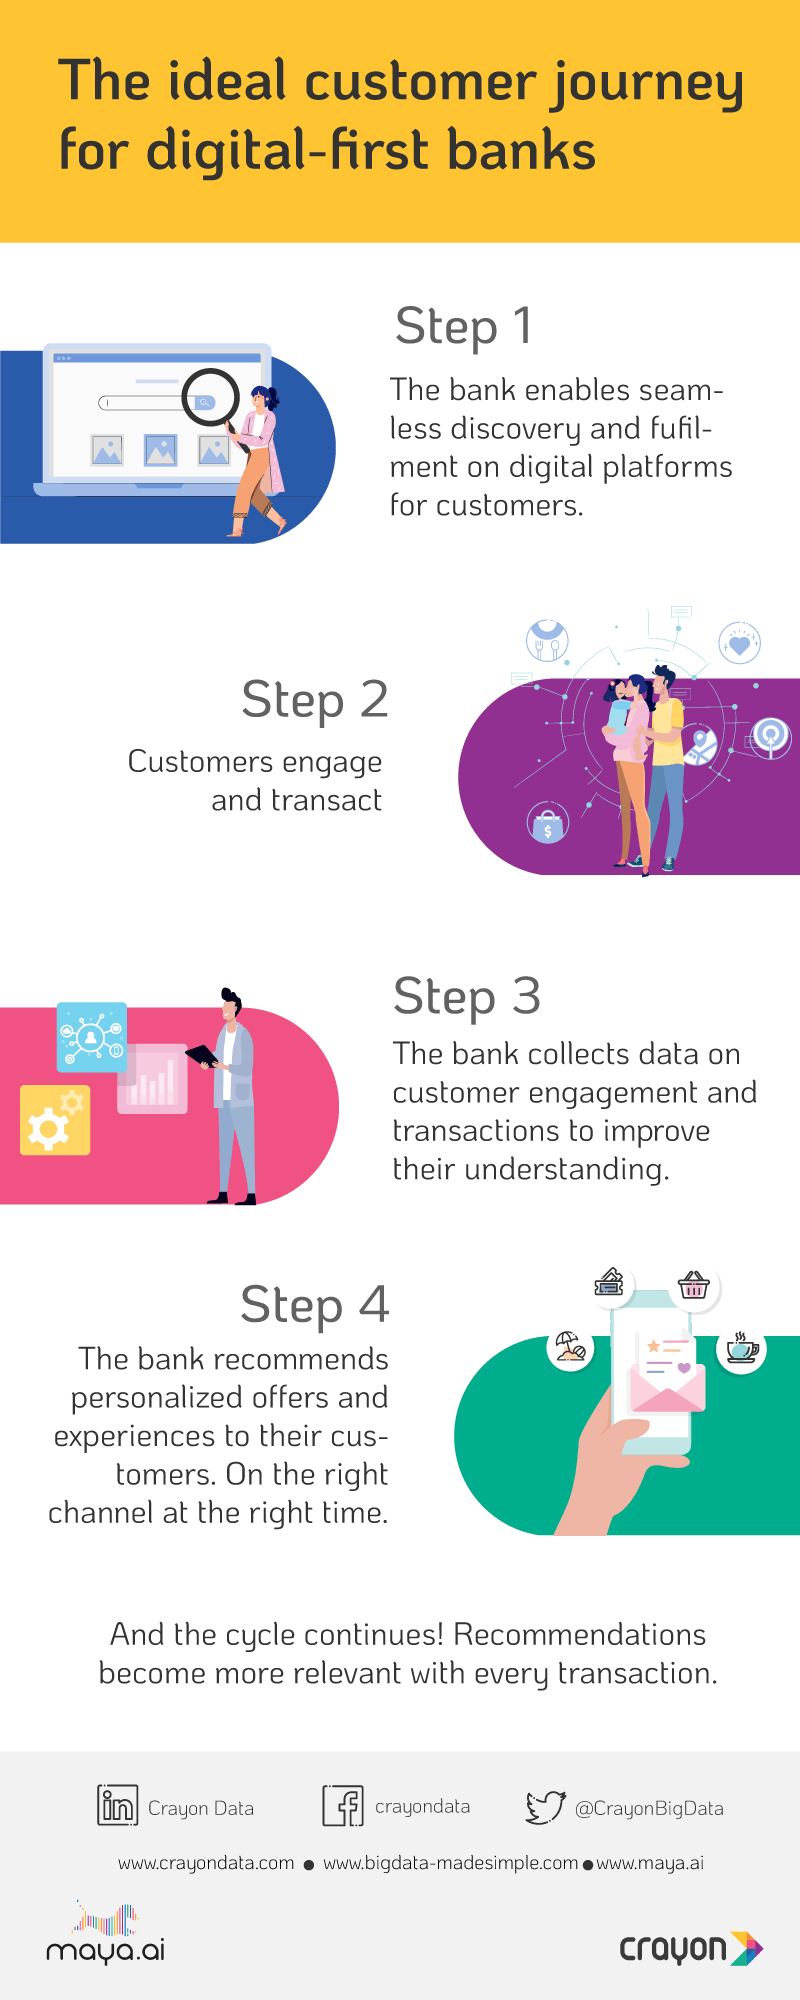 The ideal customer journey for digital-first banks